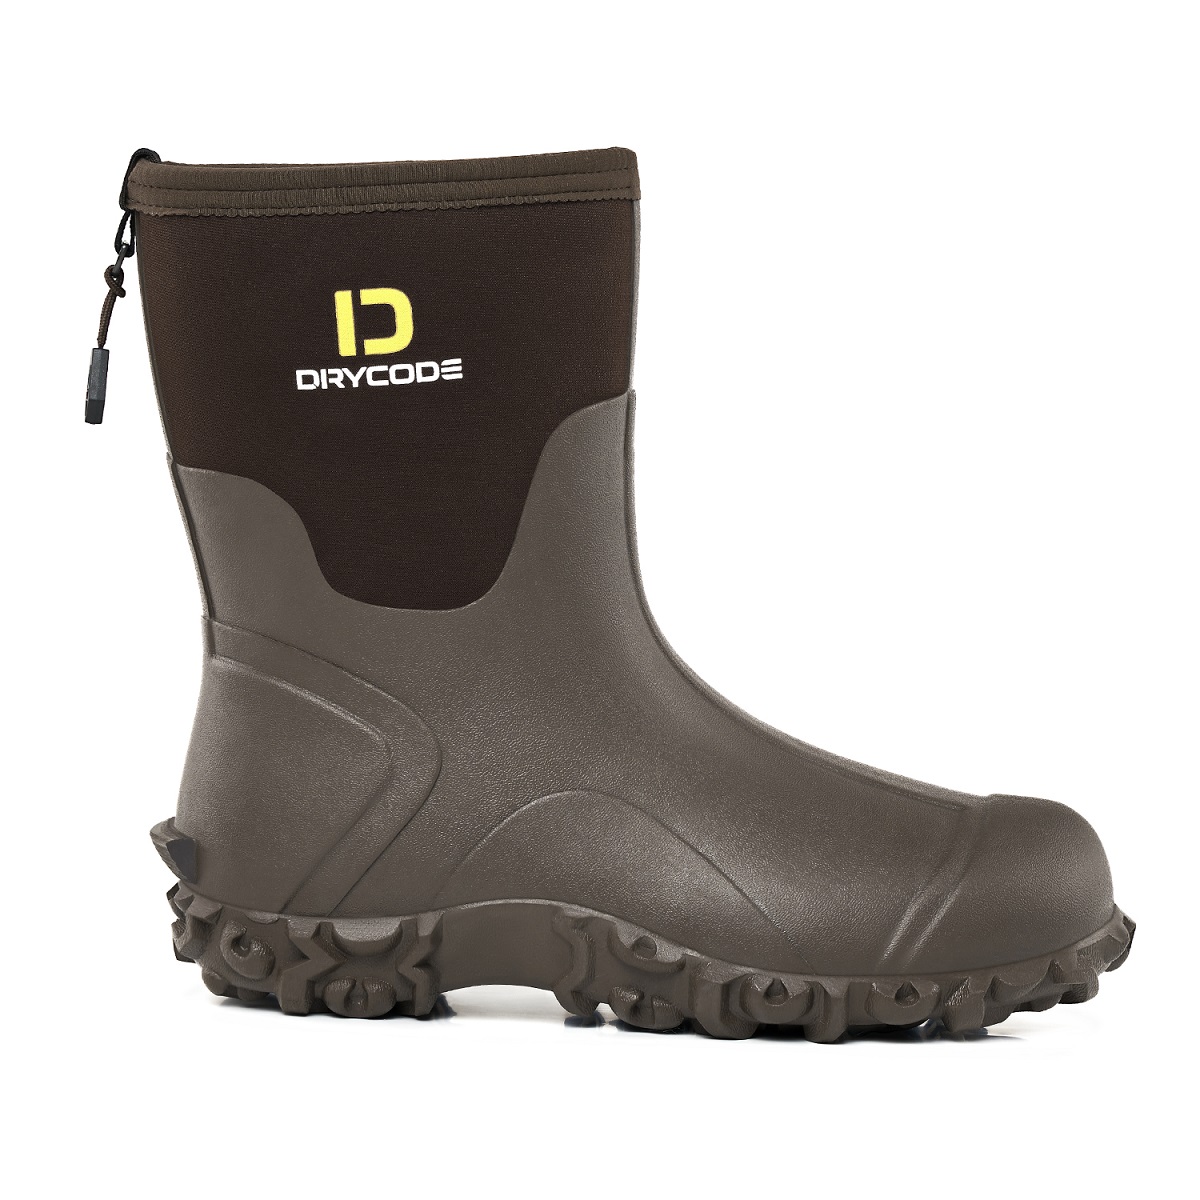 DRYCODE Waterproof Rubber Boots for Men (Green) with Steel Shank, Mid Calf Rain Boots